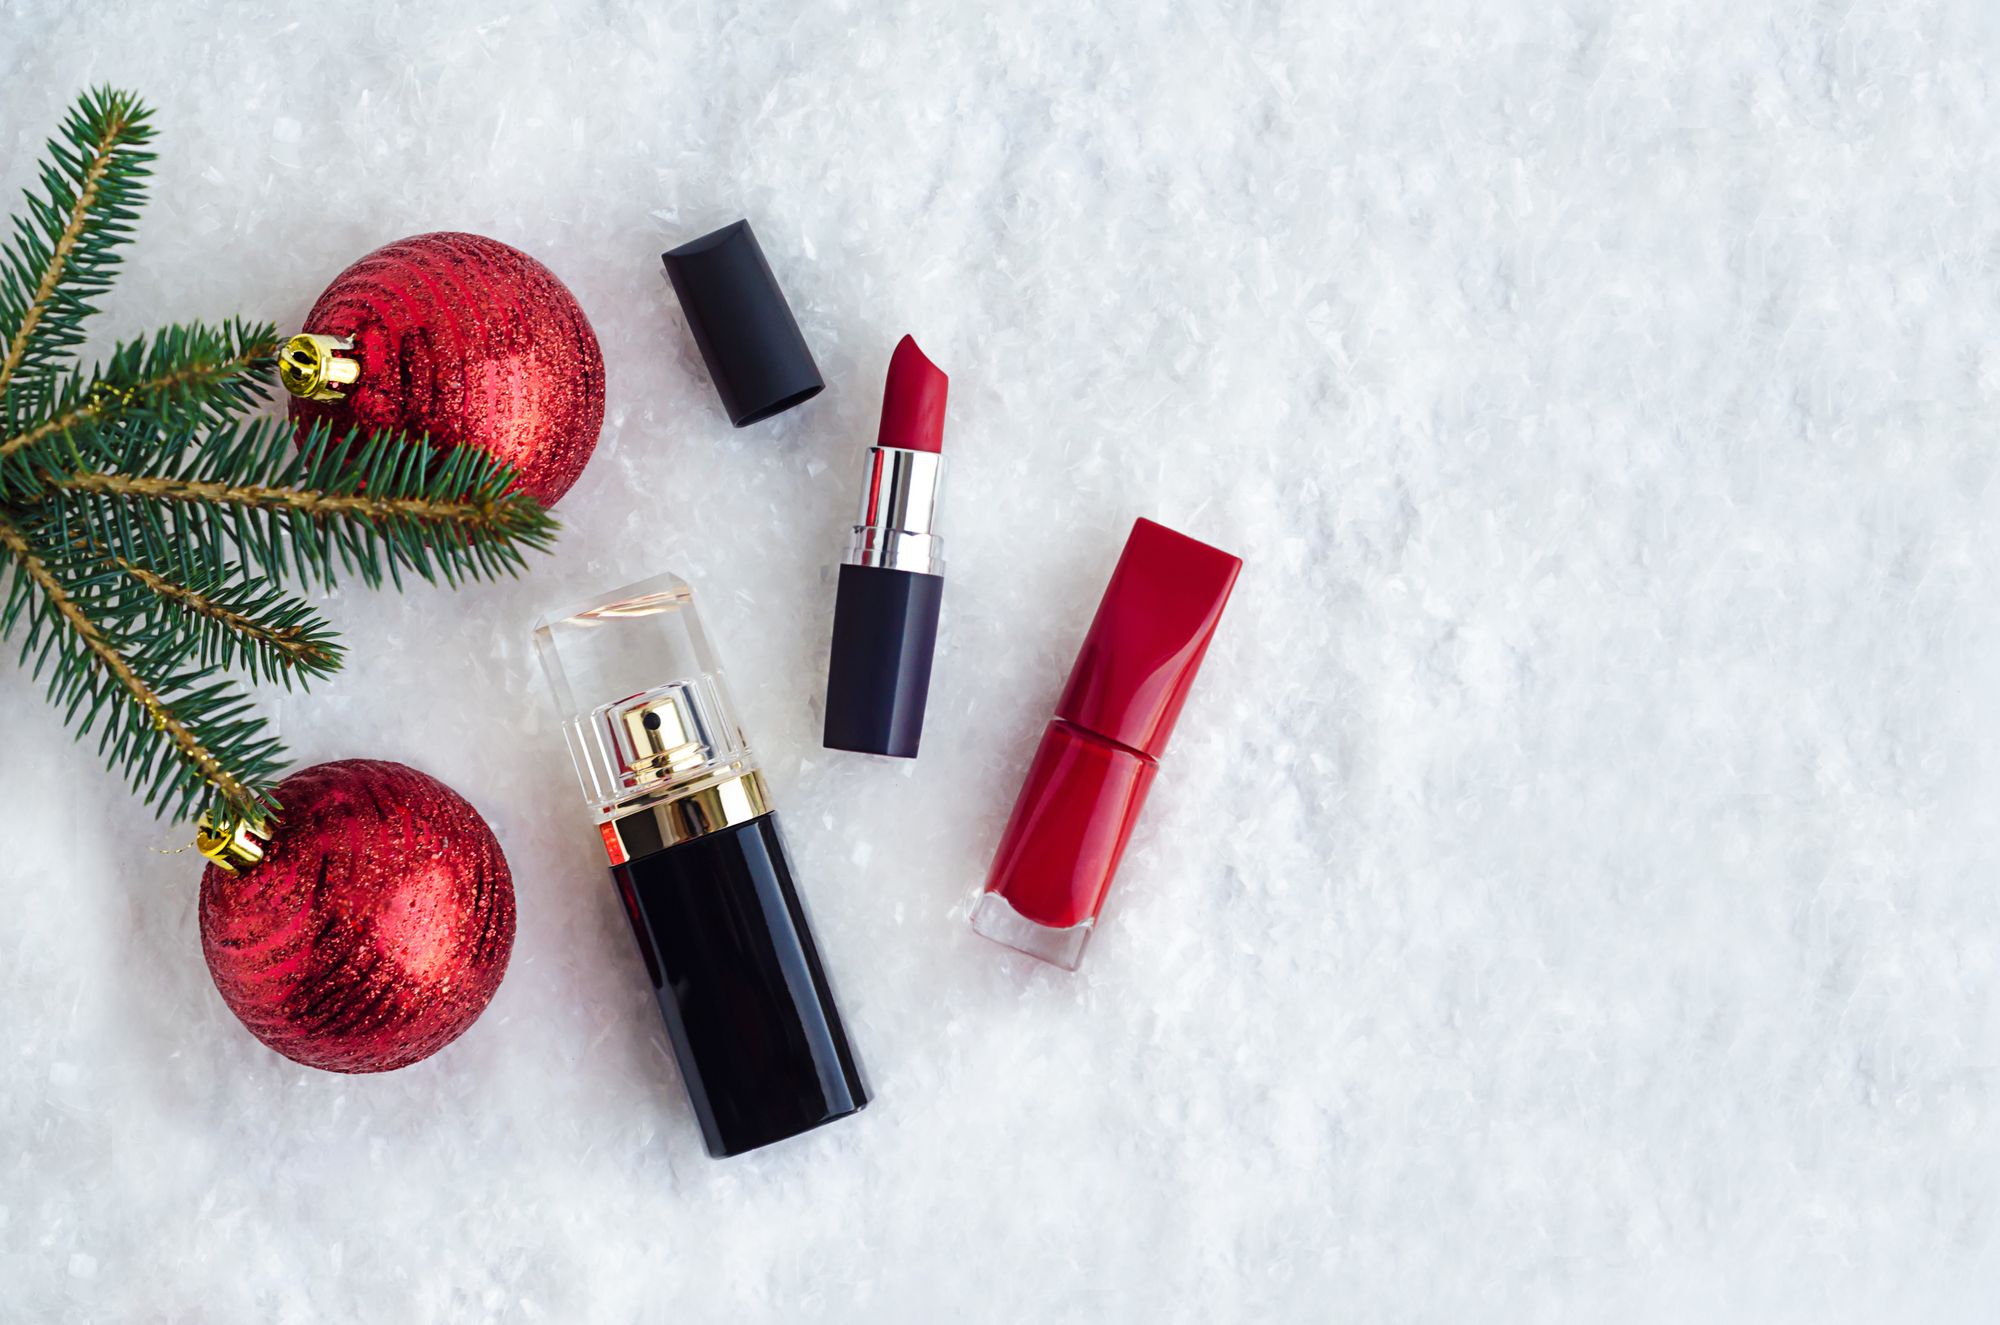 9 Miniature Beauty Products That Will Make The Cutest Gifts This Christmas